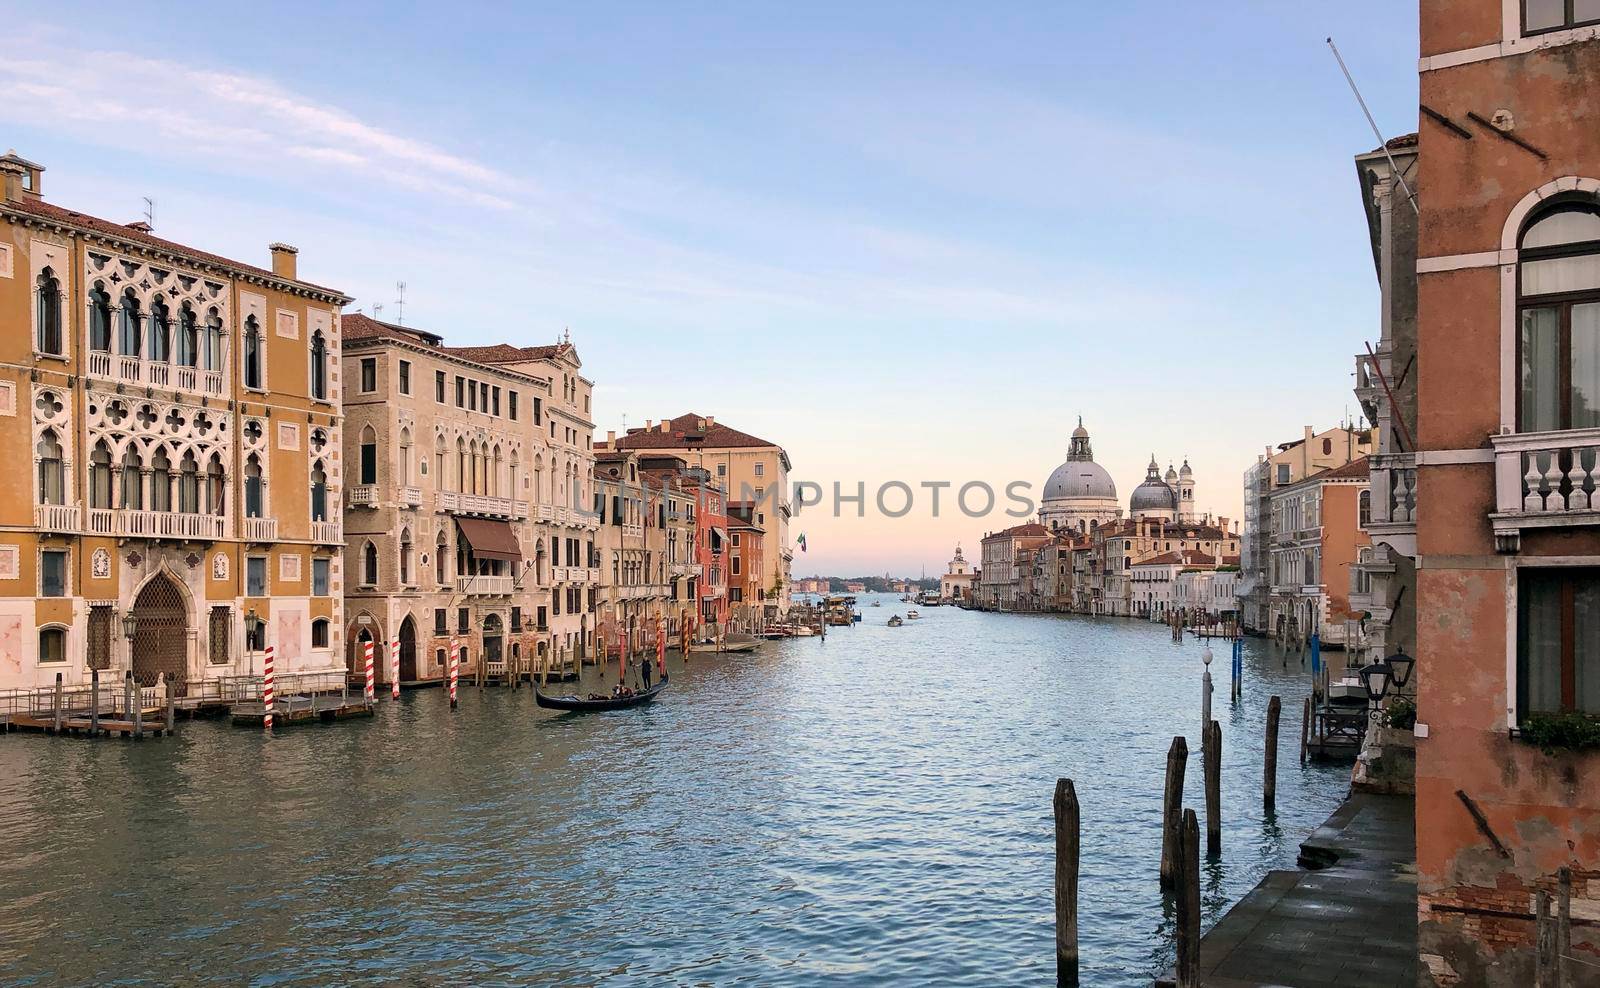  Venice, Italy, Ariel view on the Grand Canal with motorboat taxis. High quality photo